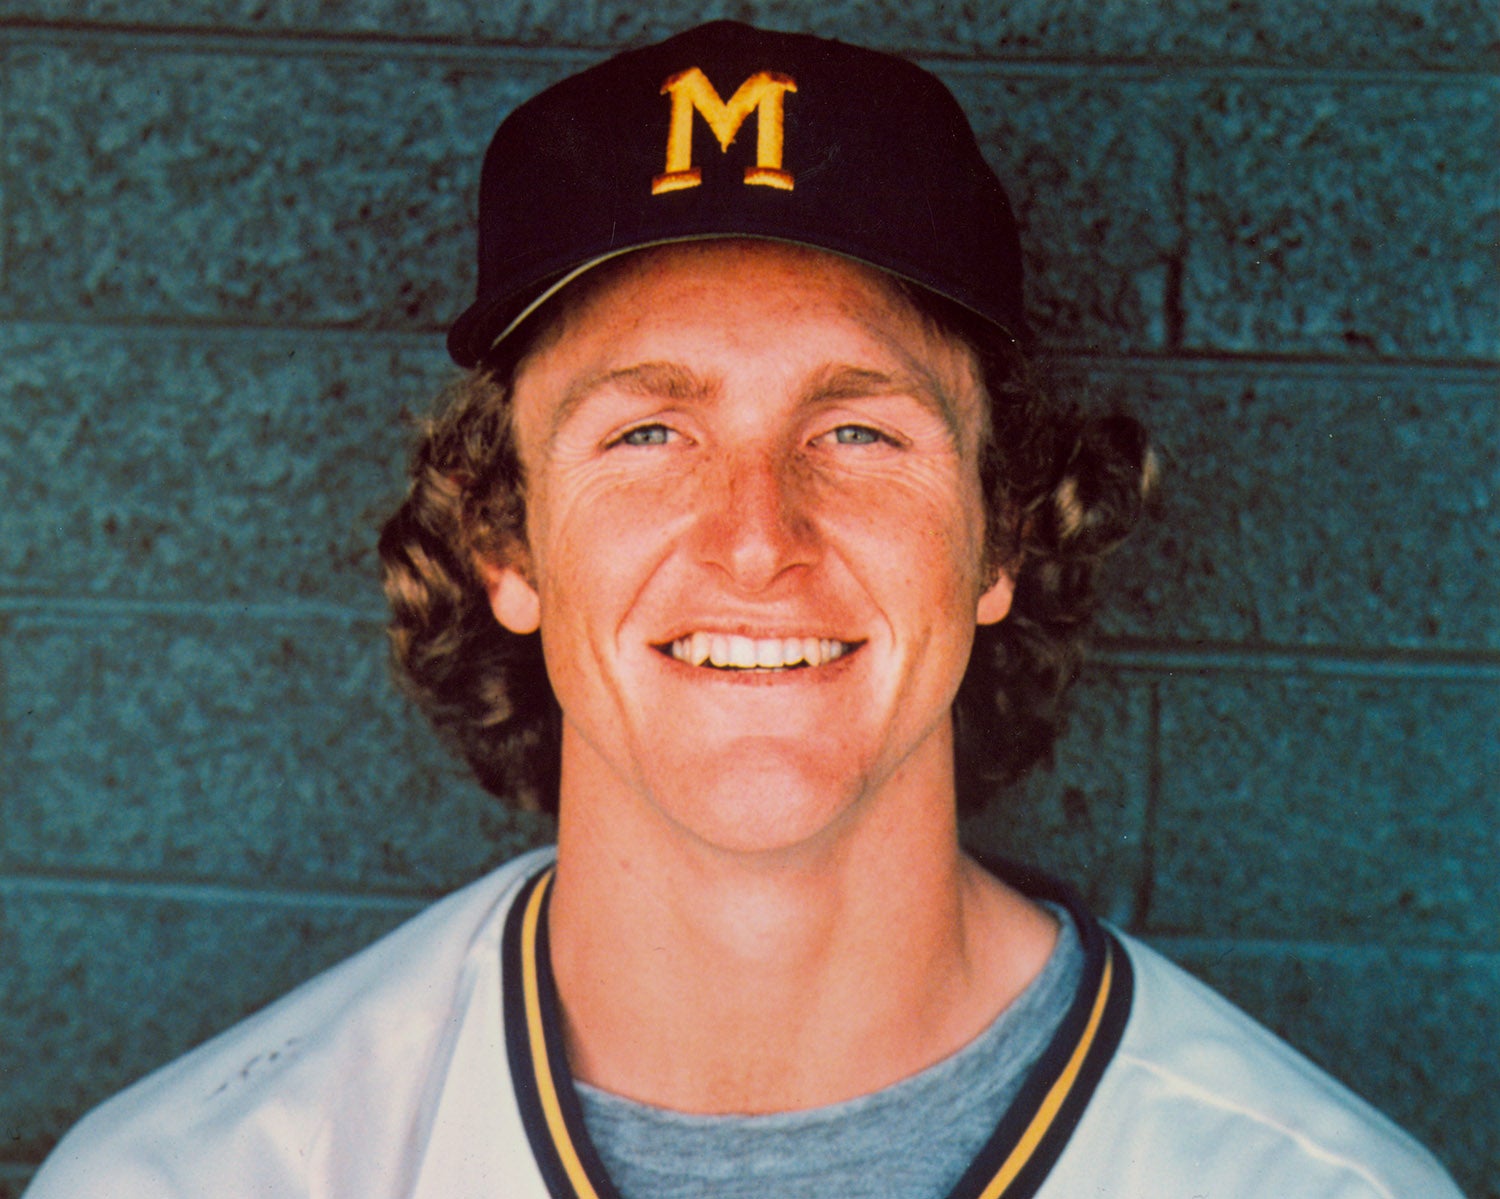 Robin Yount and Dave Winfield were picked No. 3 and No. 4 overall in the MLB Draft